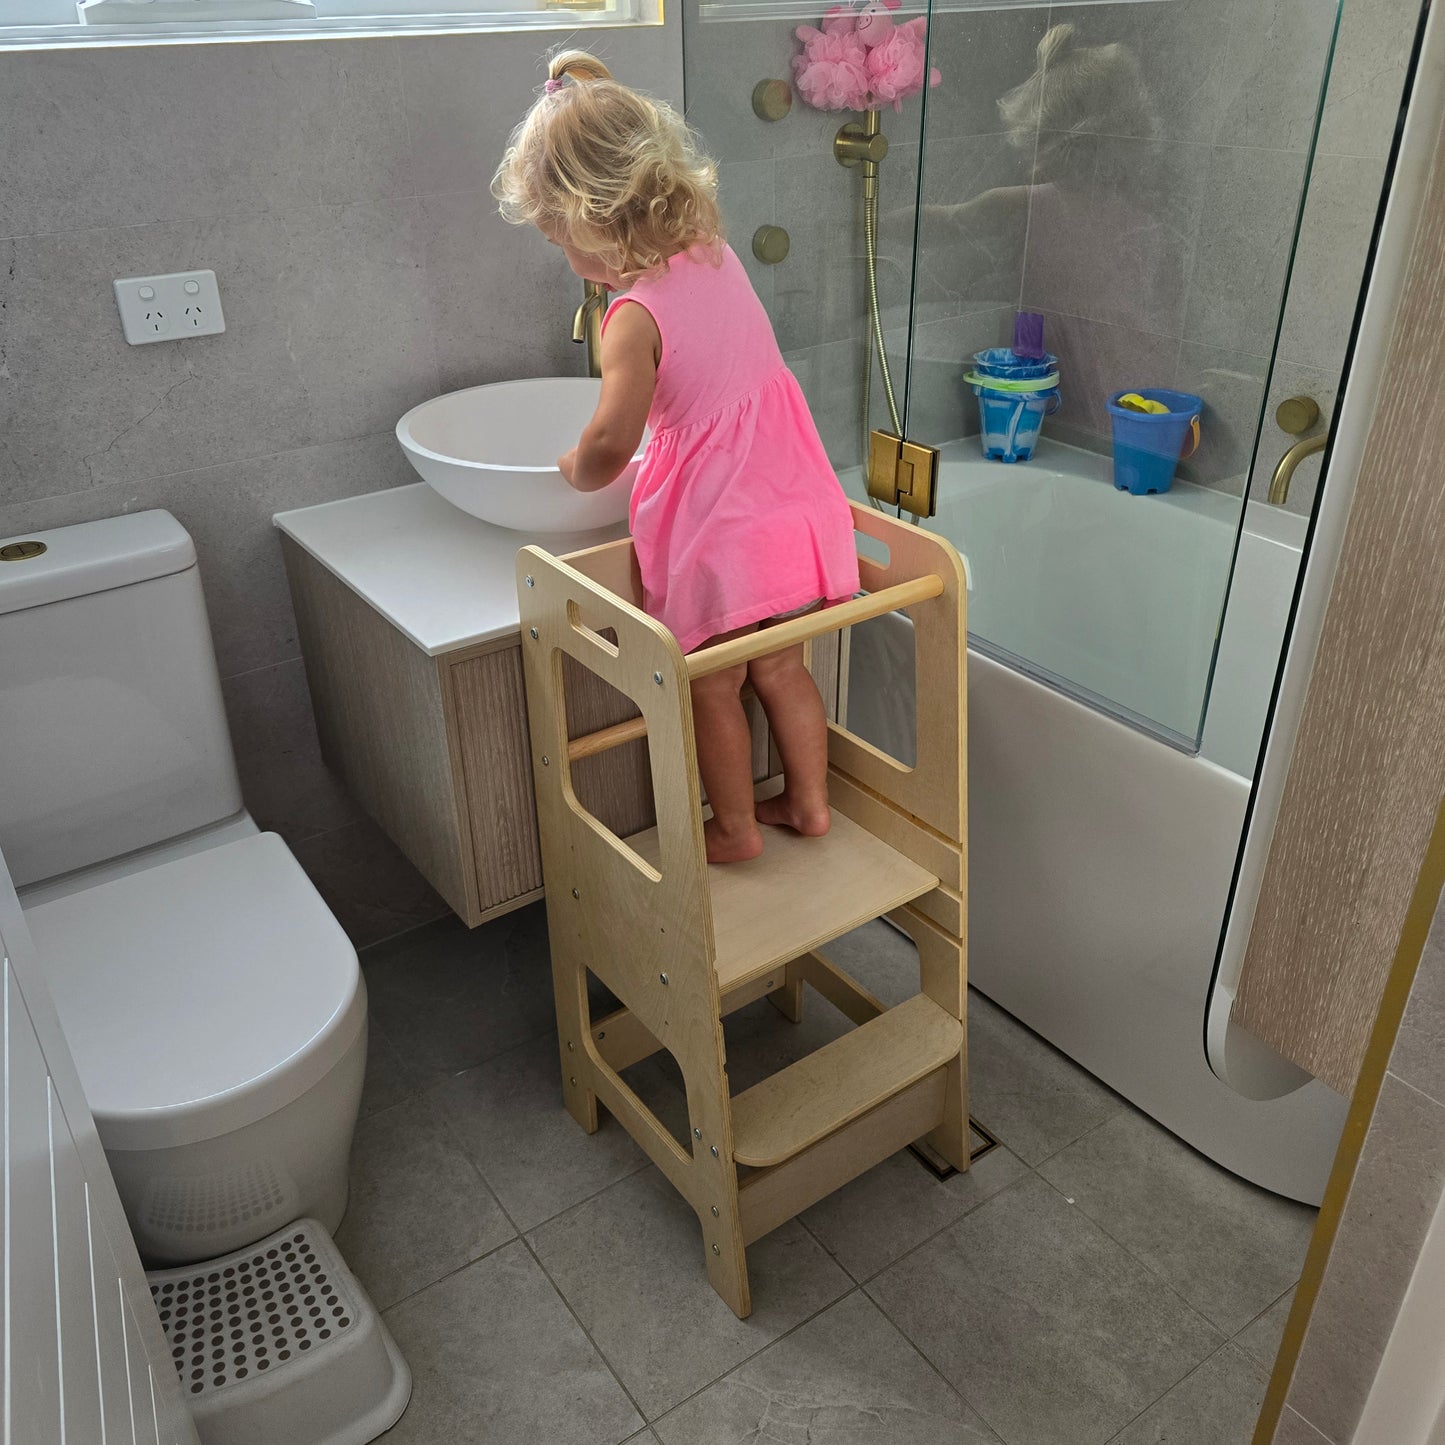 Little girl on the Natural Adjustable Learning Tower at a bathroom sink washing her hands.